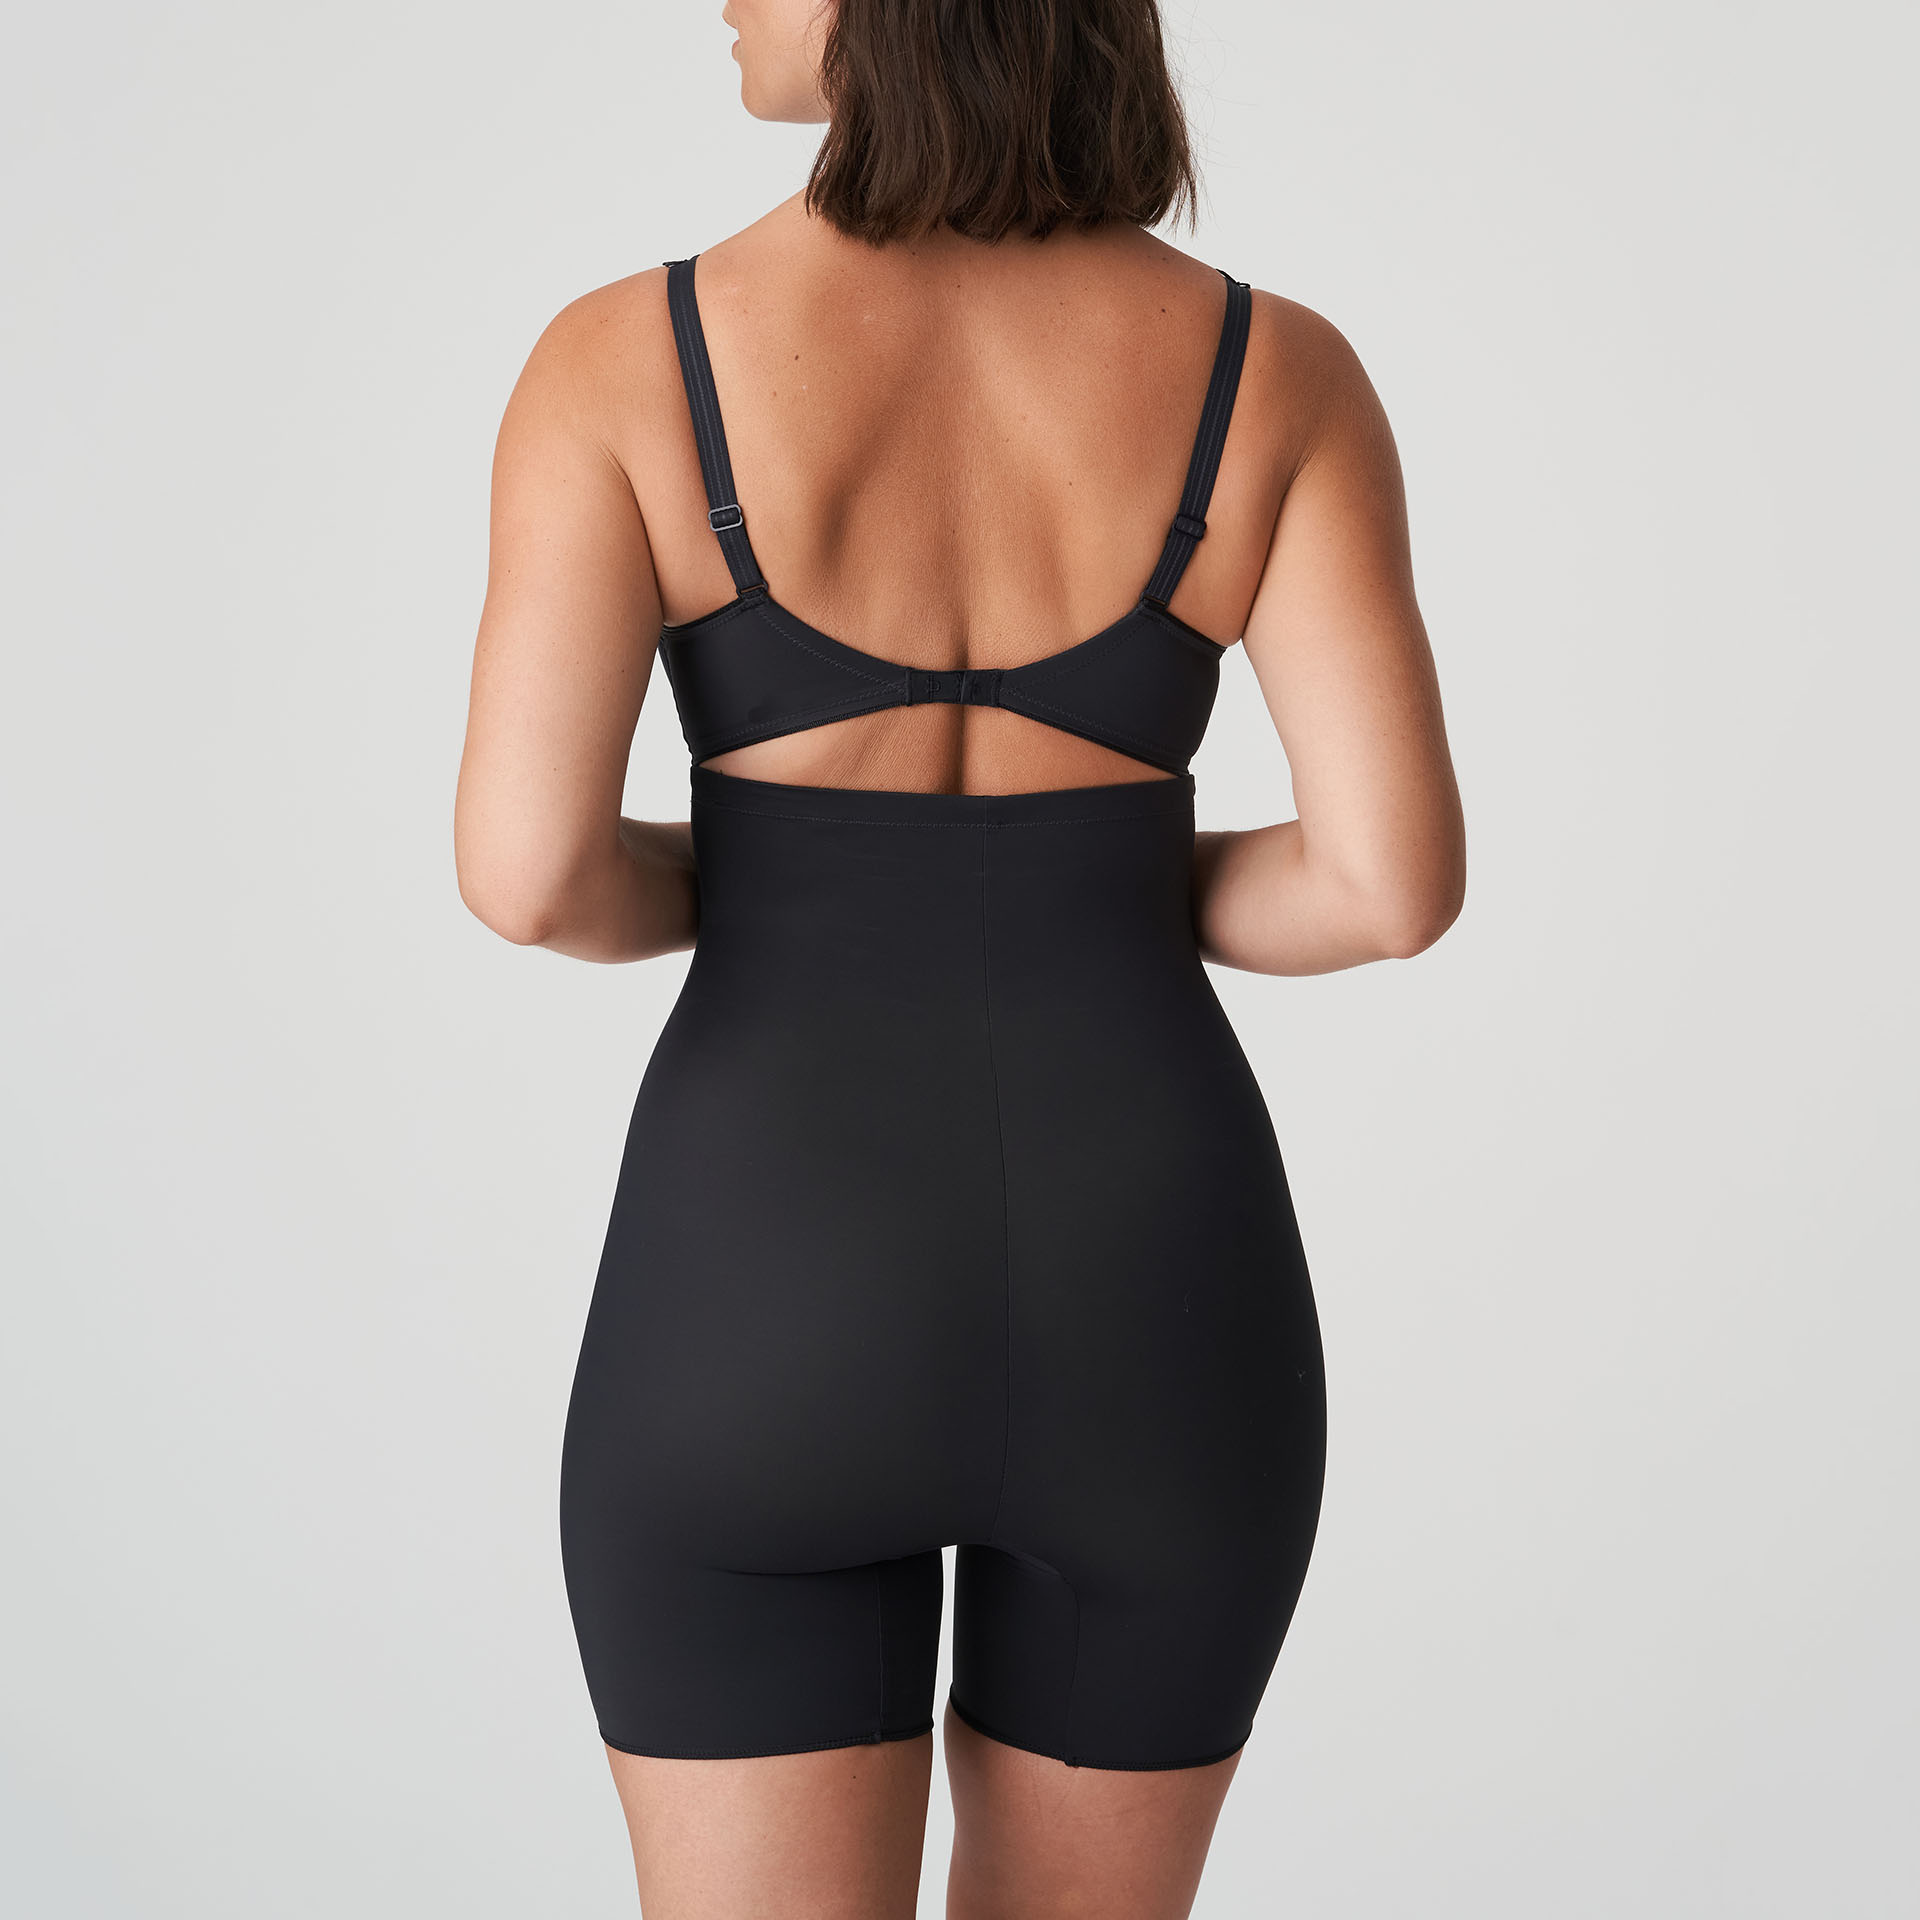 PrimaDonna - Couture - Shapewear Dress with Briefs